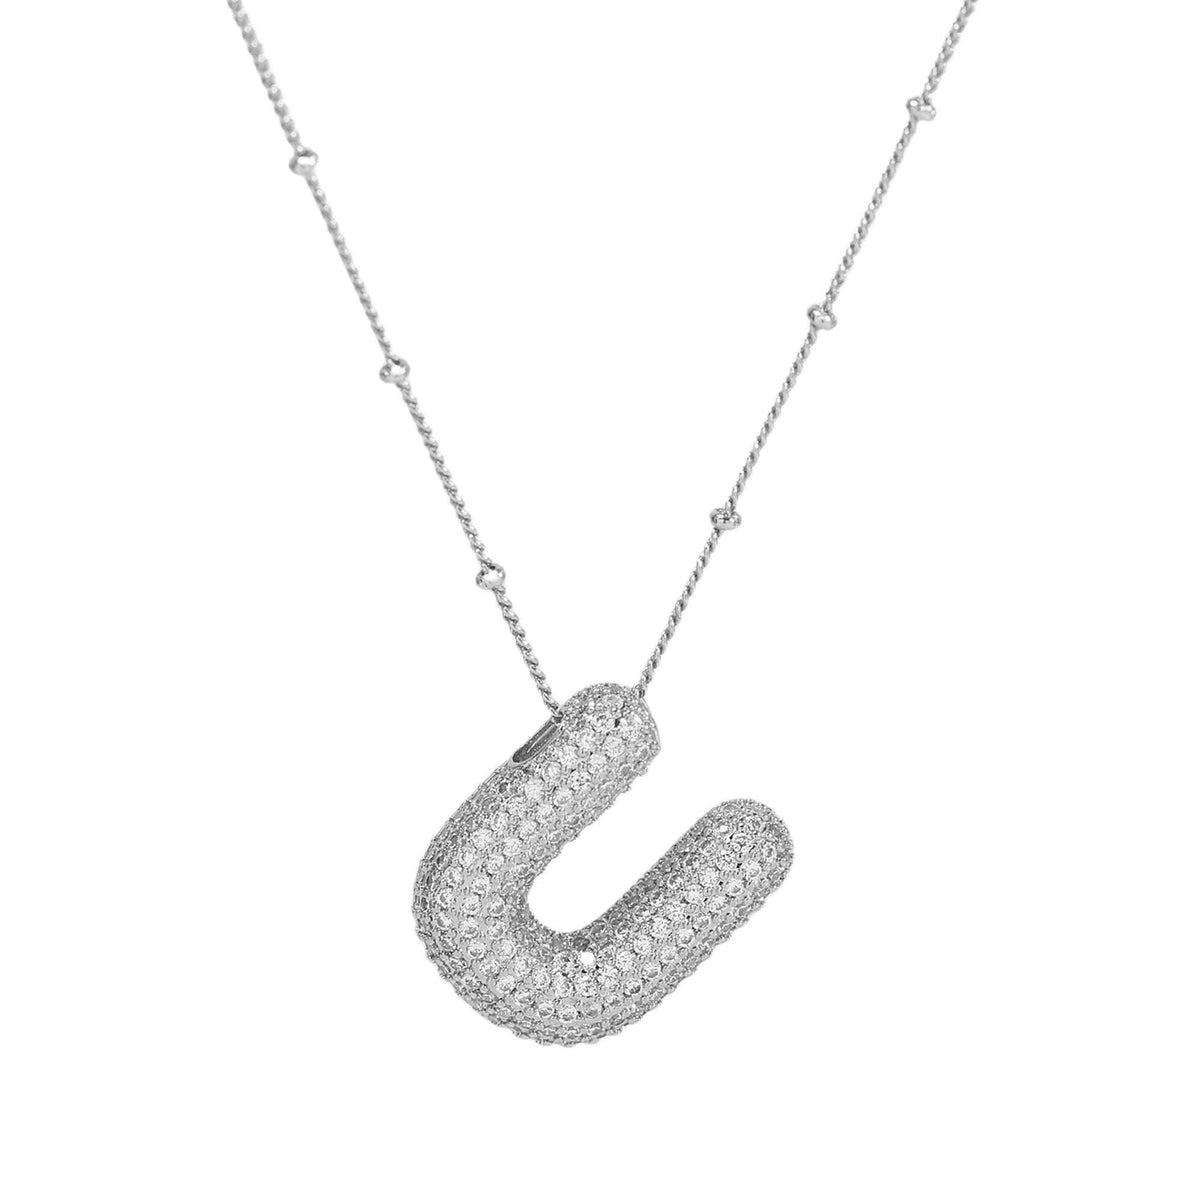 Initial CZ Balloon Bubble Sterling Silver Necklace: C